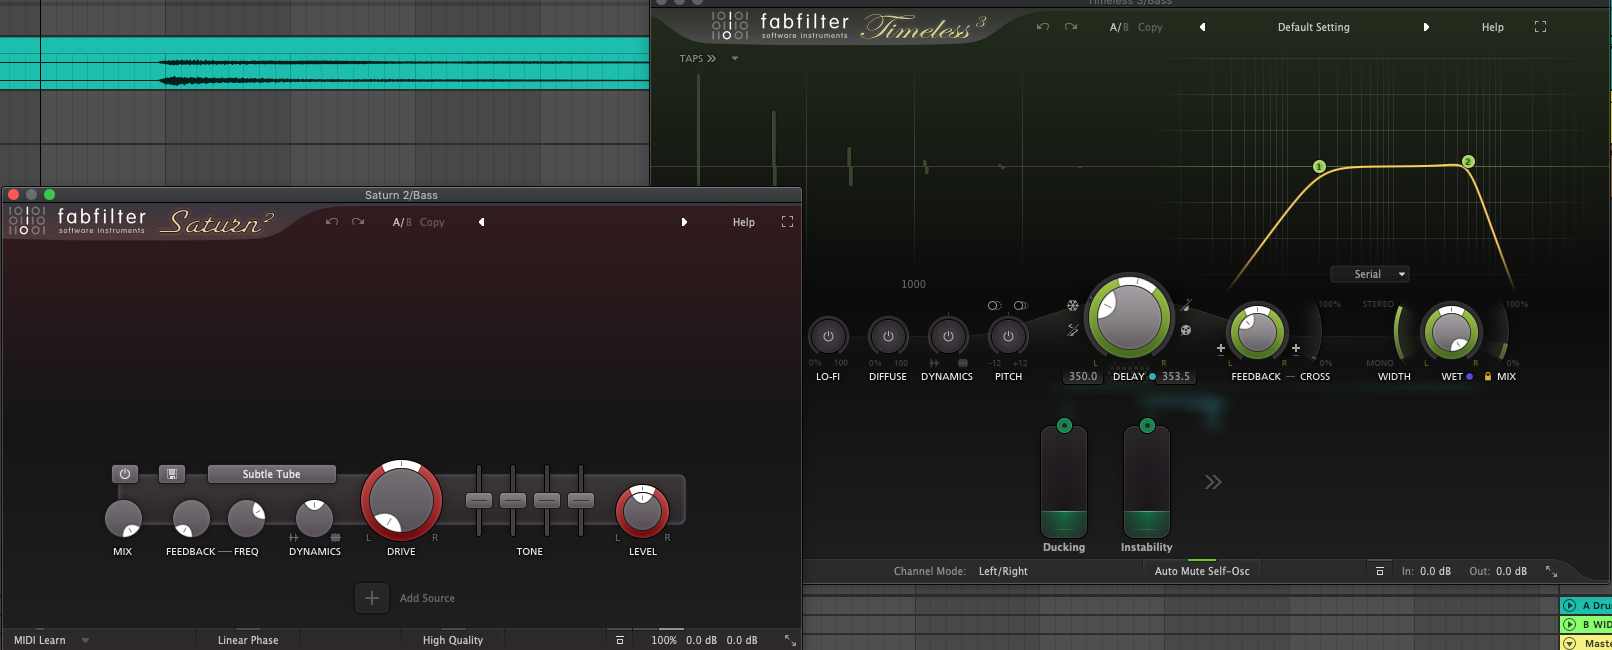 Fabfilter Saturn2 and Timeless 3